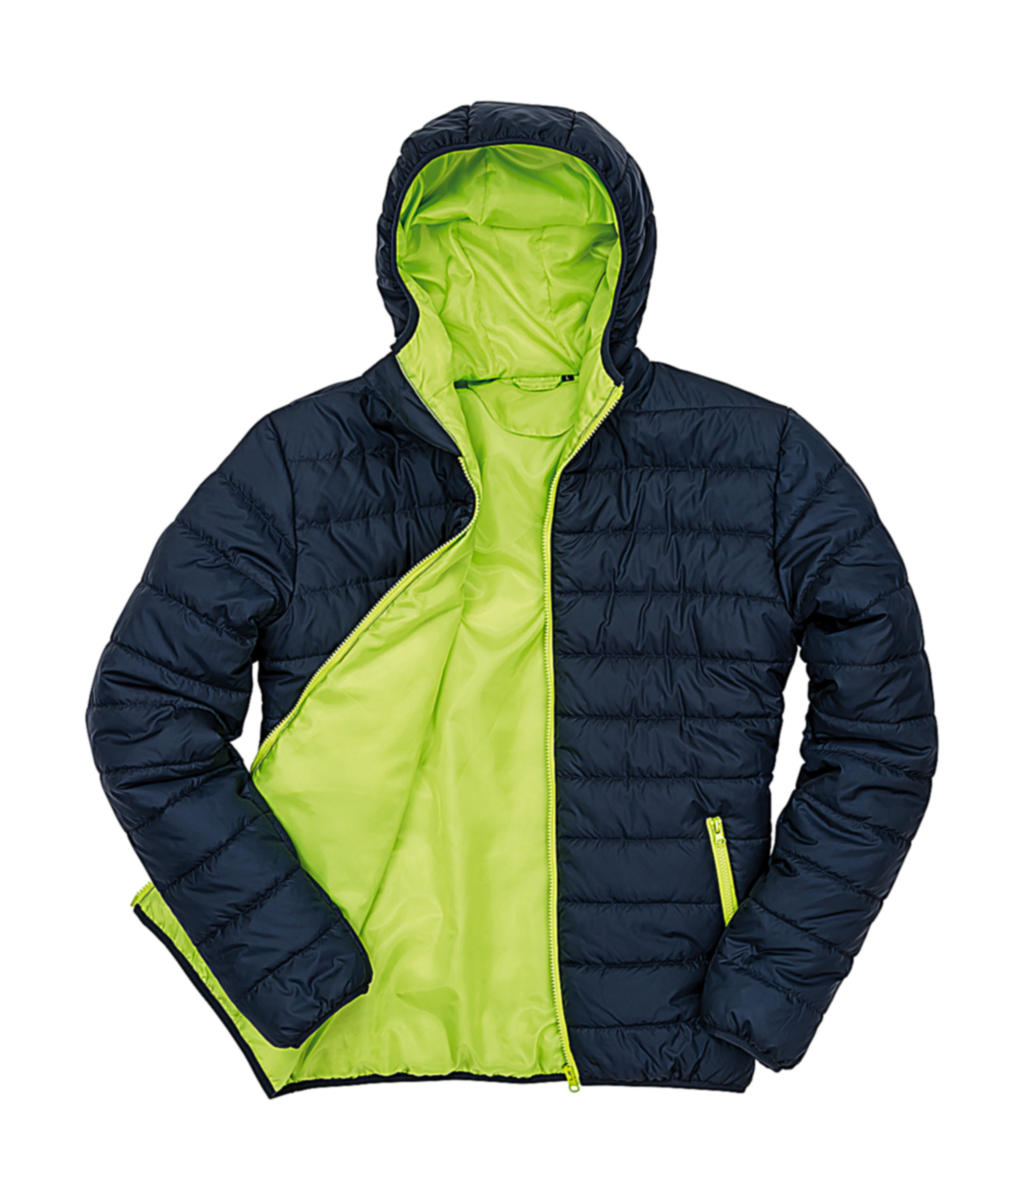  Soft Padded Jacket in Farbe Navy/Lime